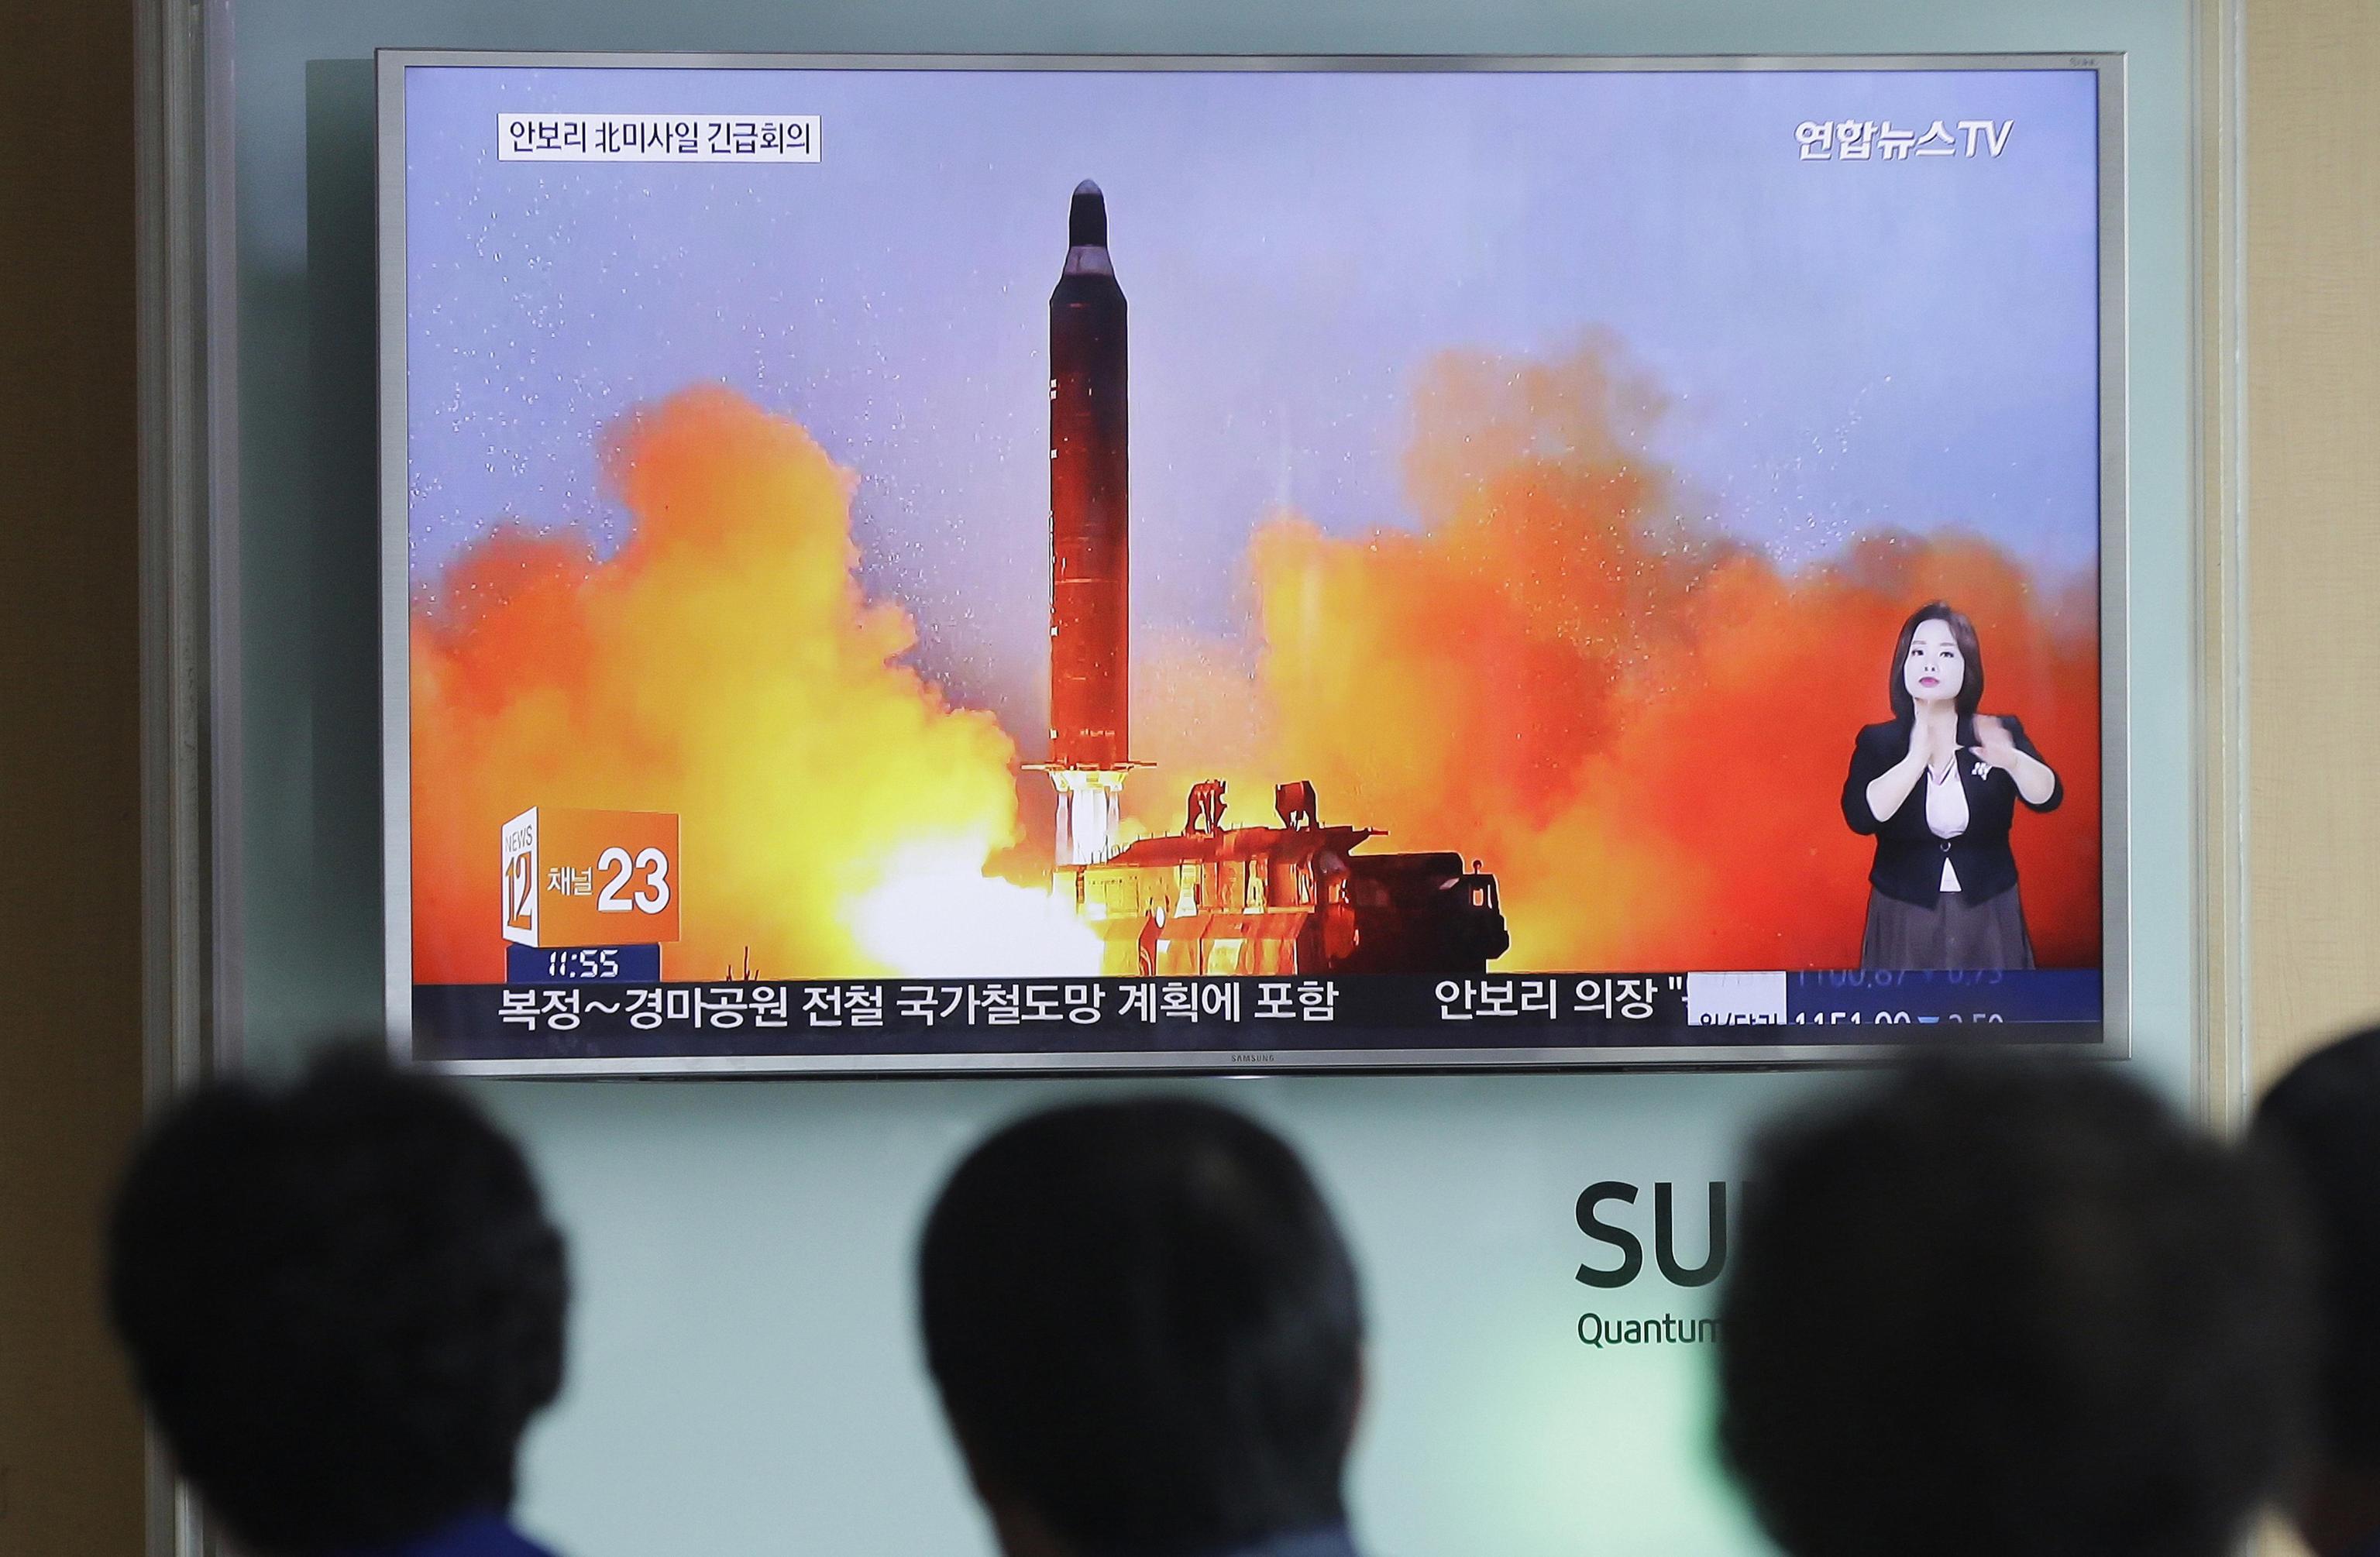 FILE - In this June 23, 2016, file photo, people watch a TV news channel airing an image of North Korea's ballistic missile launch published in North Korea's Rodong Sinmun newspaper at the Seoul Railway Station in Seoul, South Korea. North Korea on Monday, March 6, 2017, fired "several" banned ballistic missiles that flew about 1,000 kilometers (620 miles) into waters off its east coast, South Korea's military said, an apparent reaction to huge military drills by Washington and Seoul that Pyongyang insists are an invasion rehearsal.(ANSA/AP Photo/Ahn Young-joon, File) [CopyrightNotice: Copyright 2016 The Associated Press. All rights reserved. This material may not be published, broadcast, rewritten or redistribu]